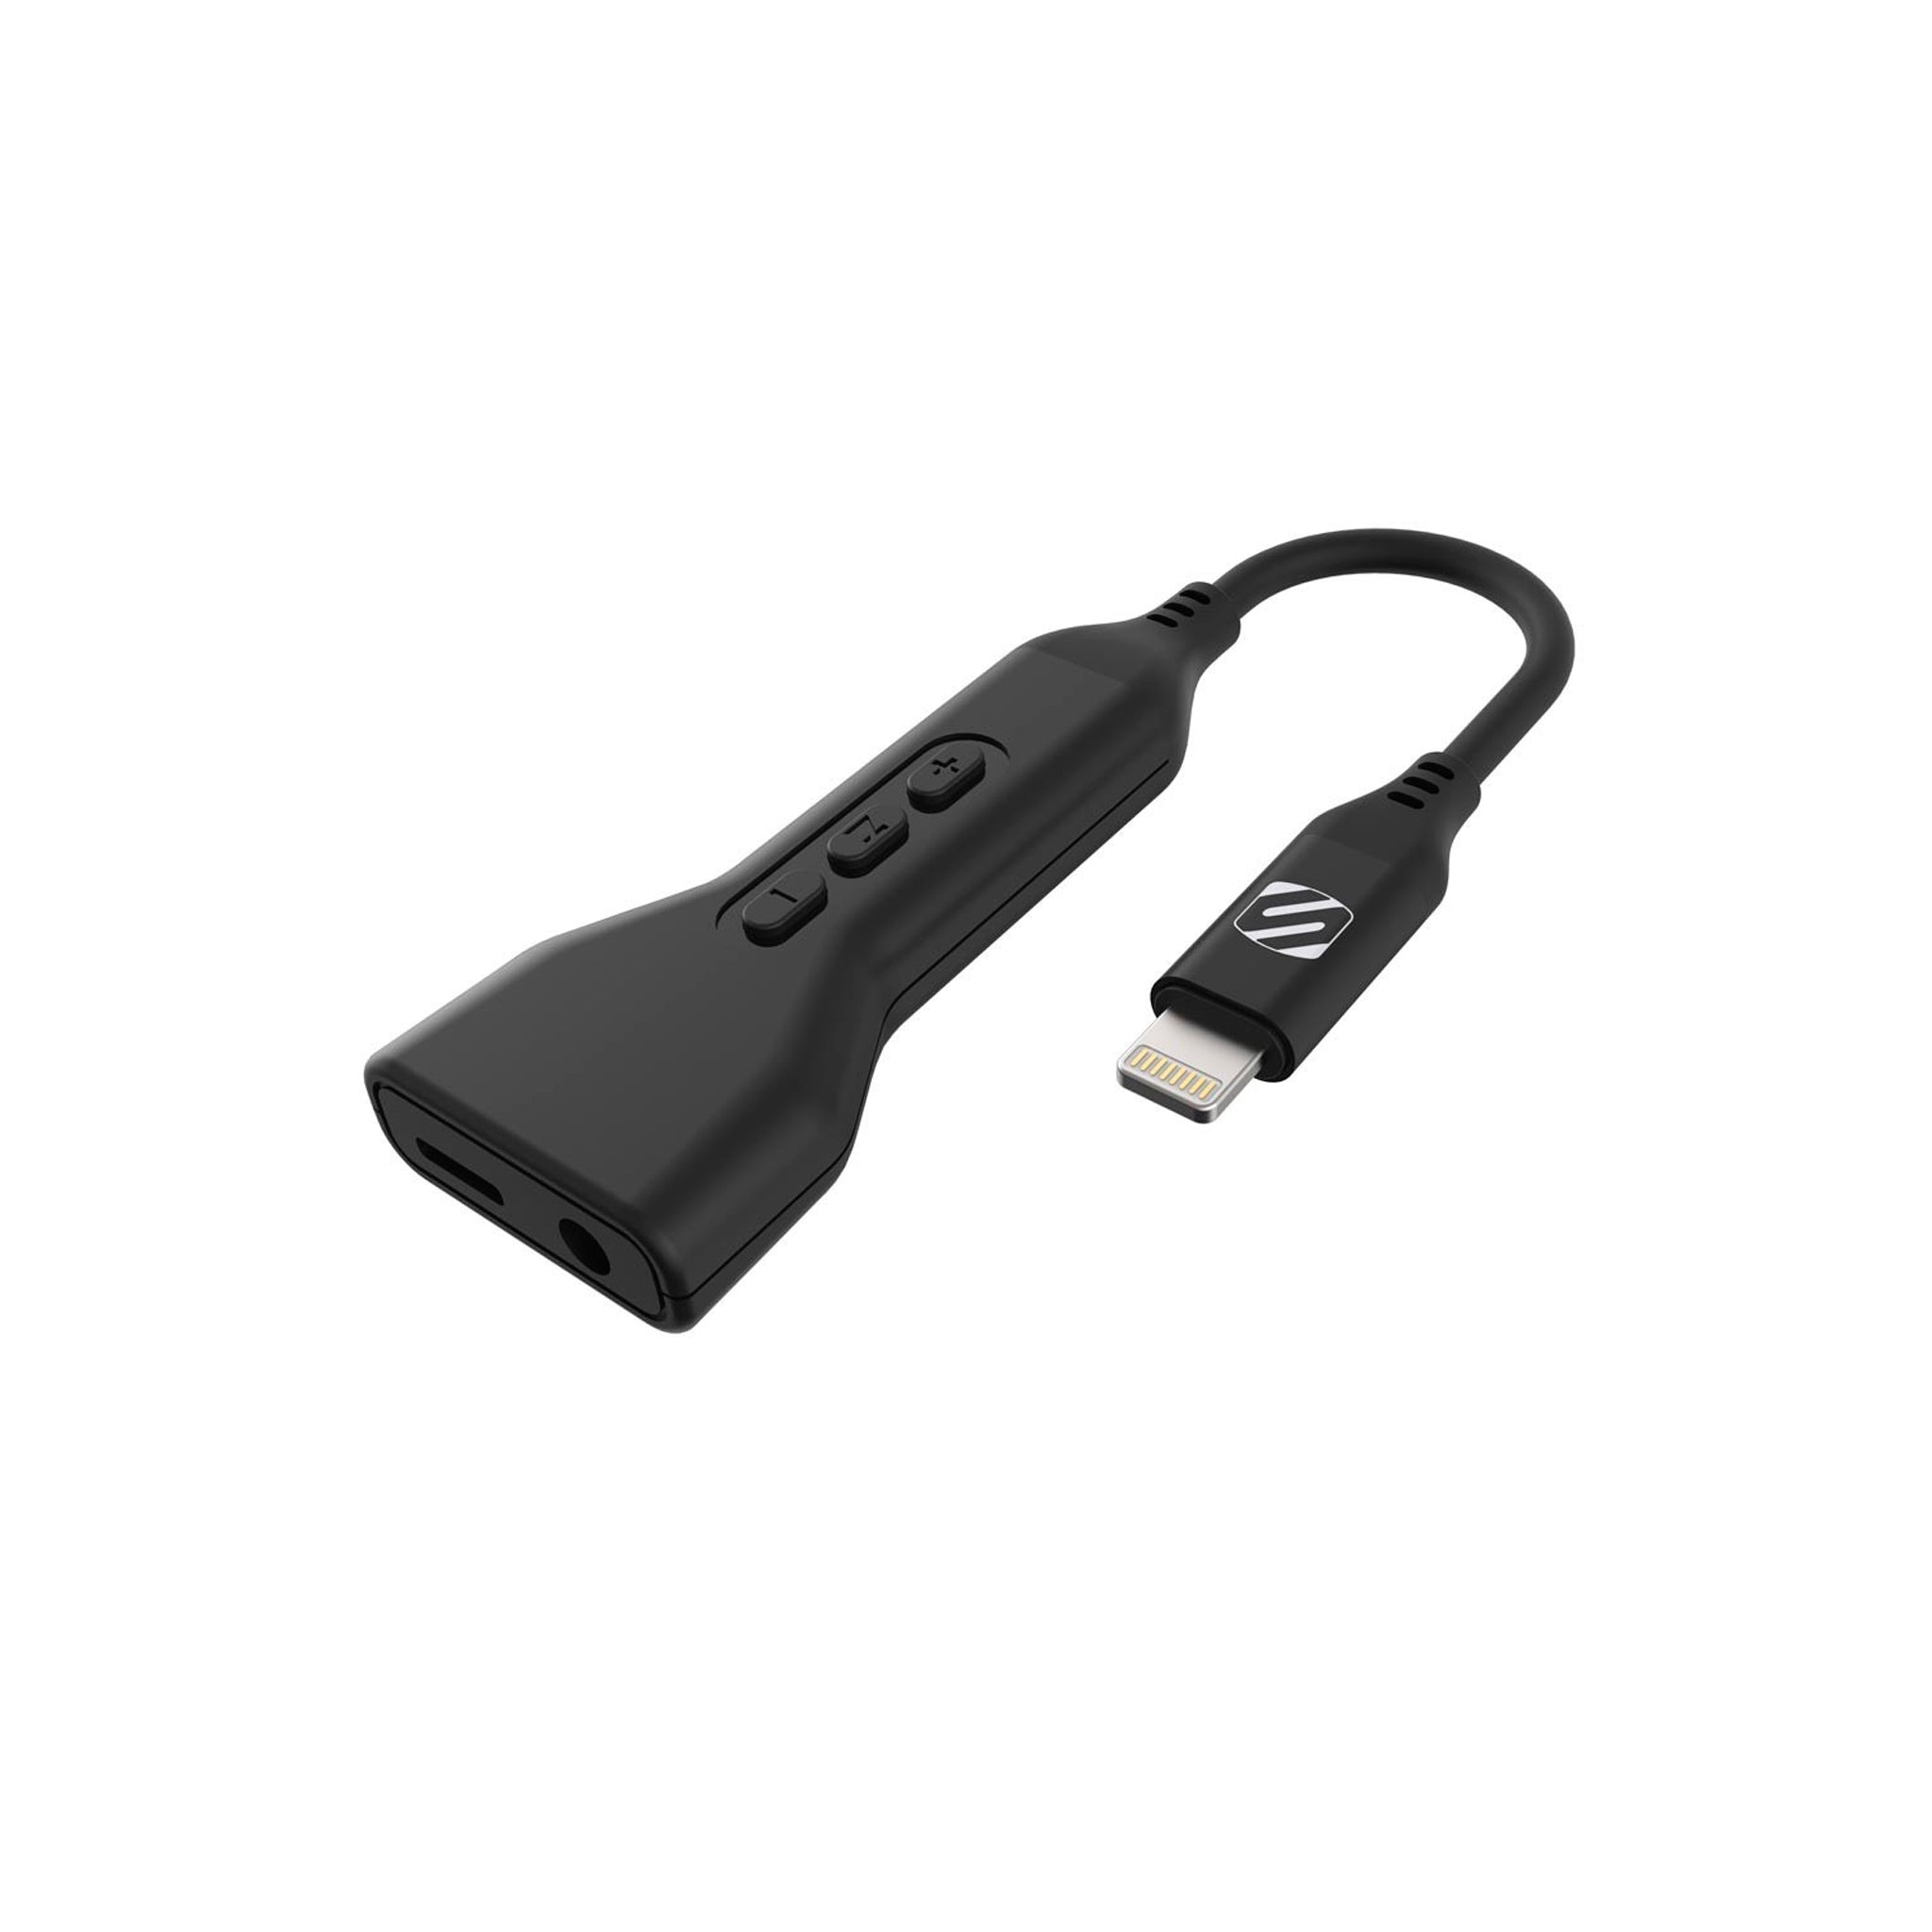 Scosche - Audio Adapter 3.5mm For Apple Lightning Devices - Black